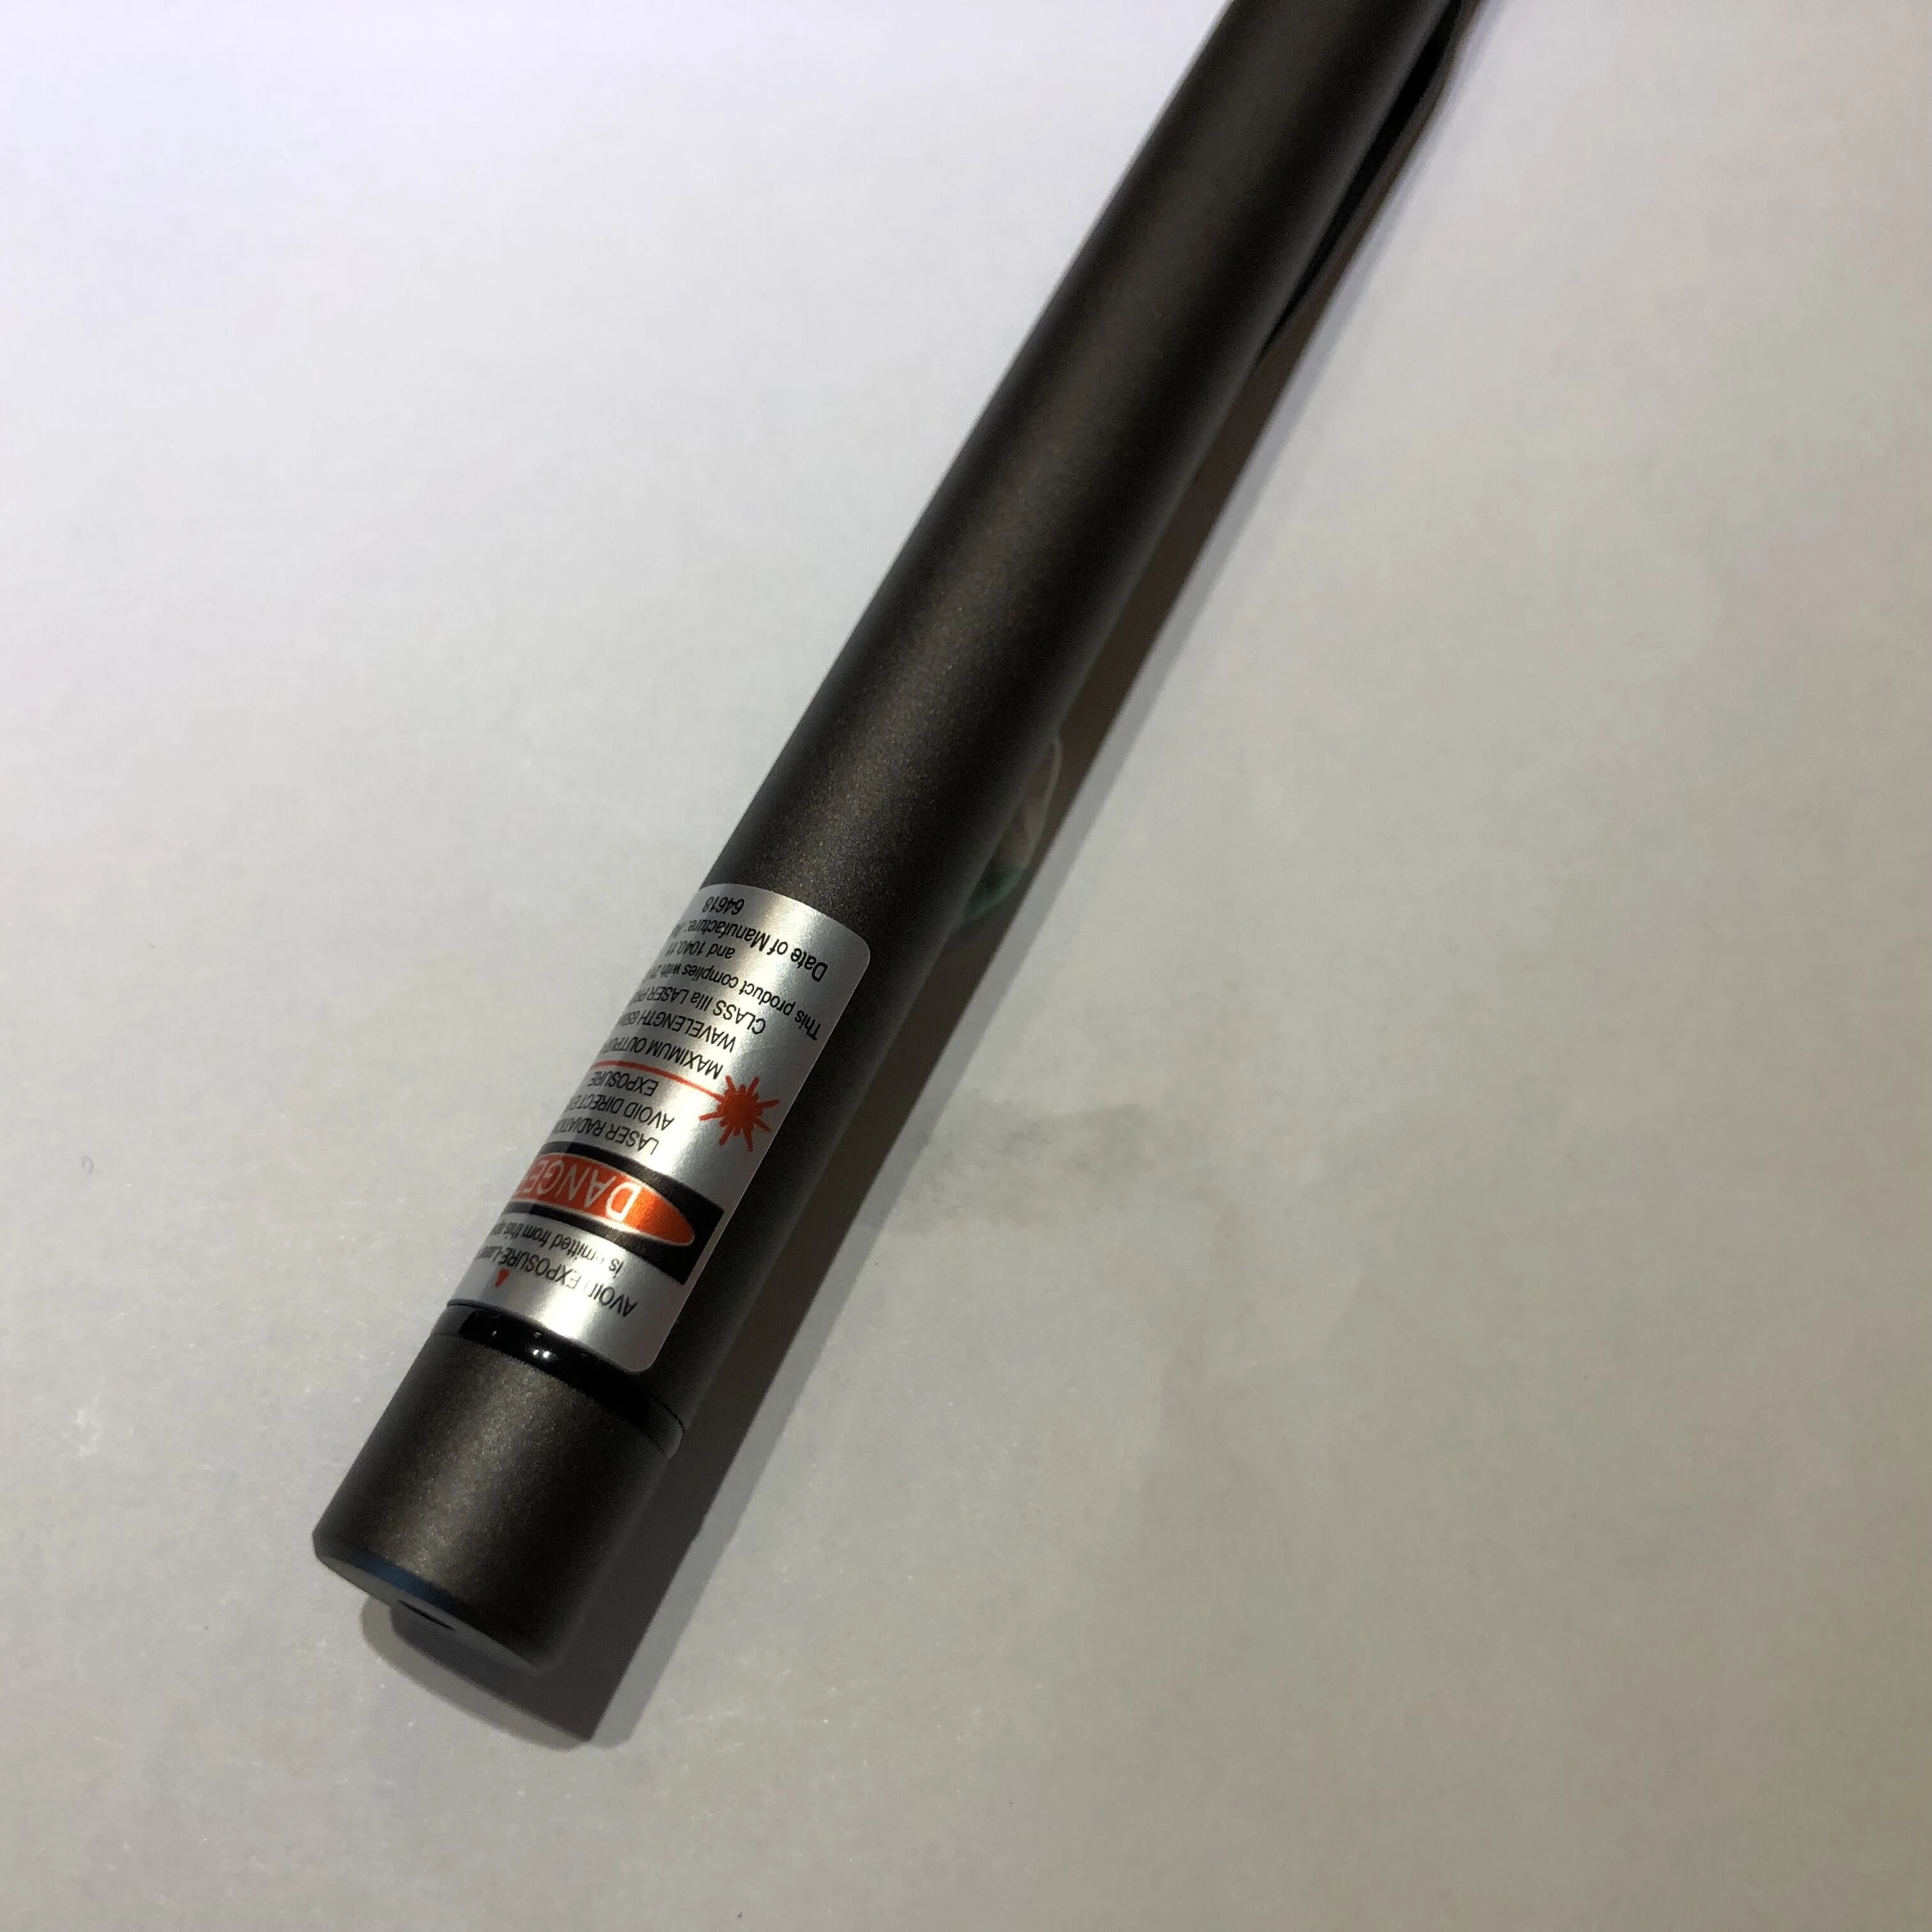 High quality New Red laser pointer pen 650nm 5mW 1mw  regulation CE for meeting/lecture/teaching/tour-guiding